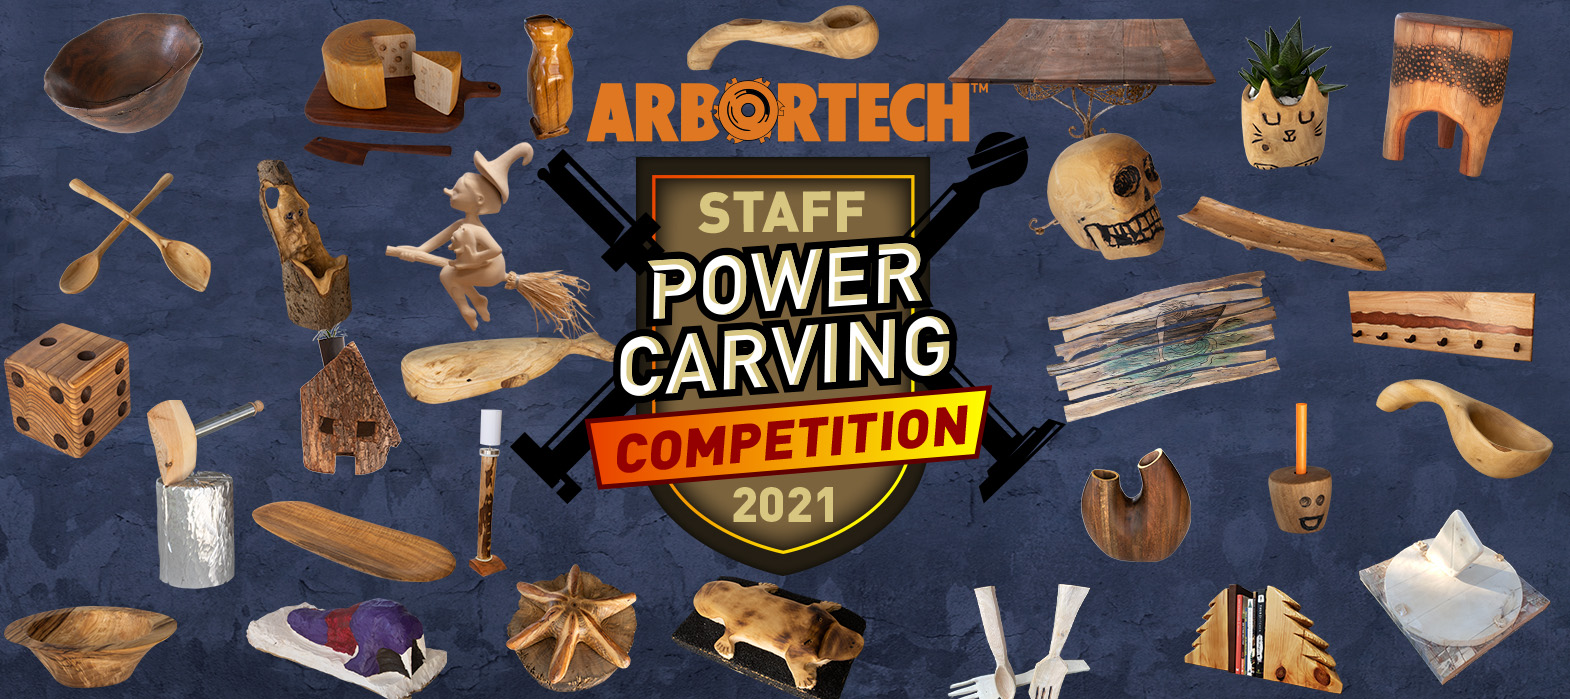 Arbortech Staff Power Carving Competition 2021